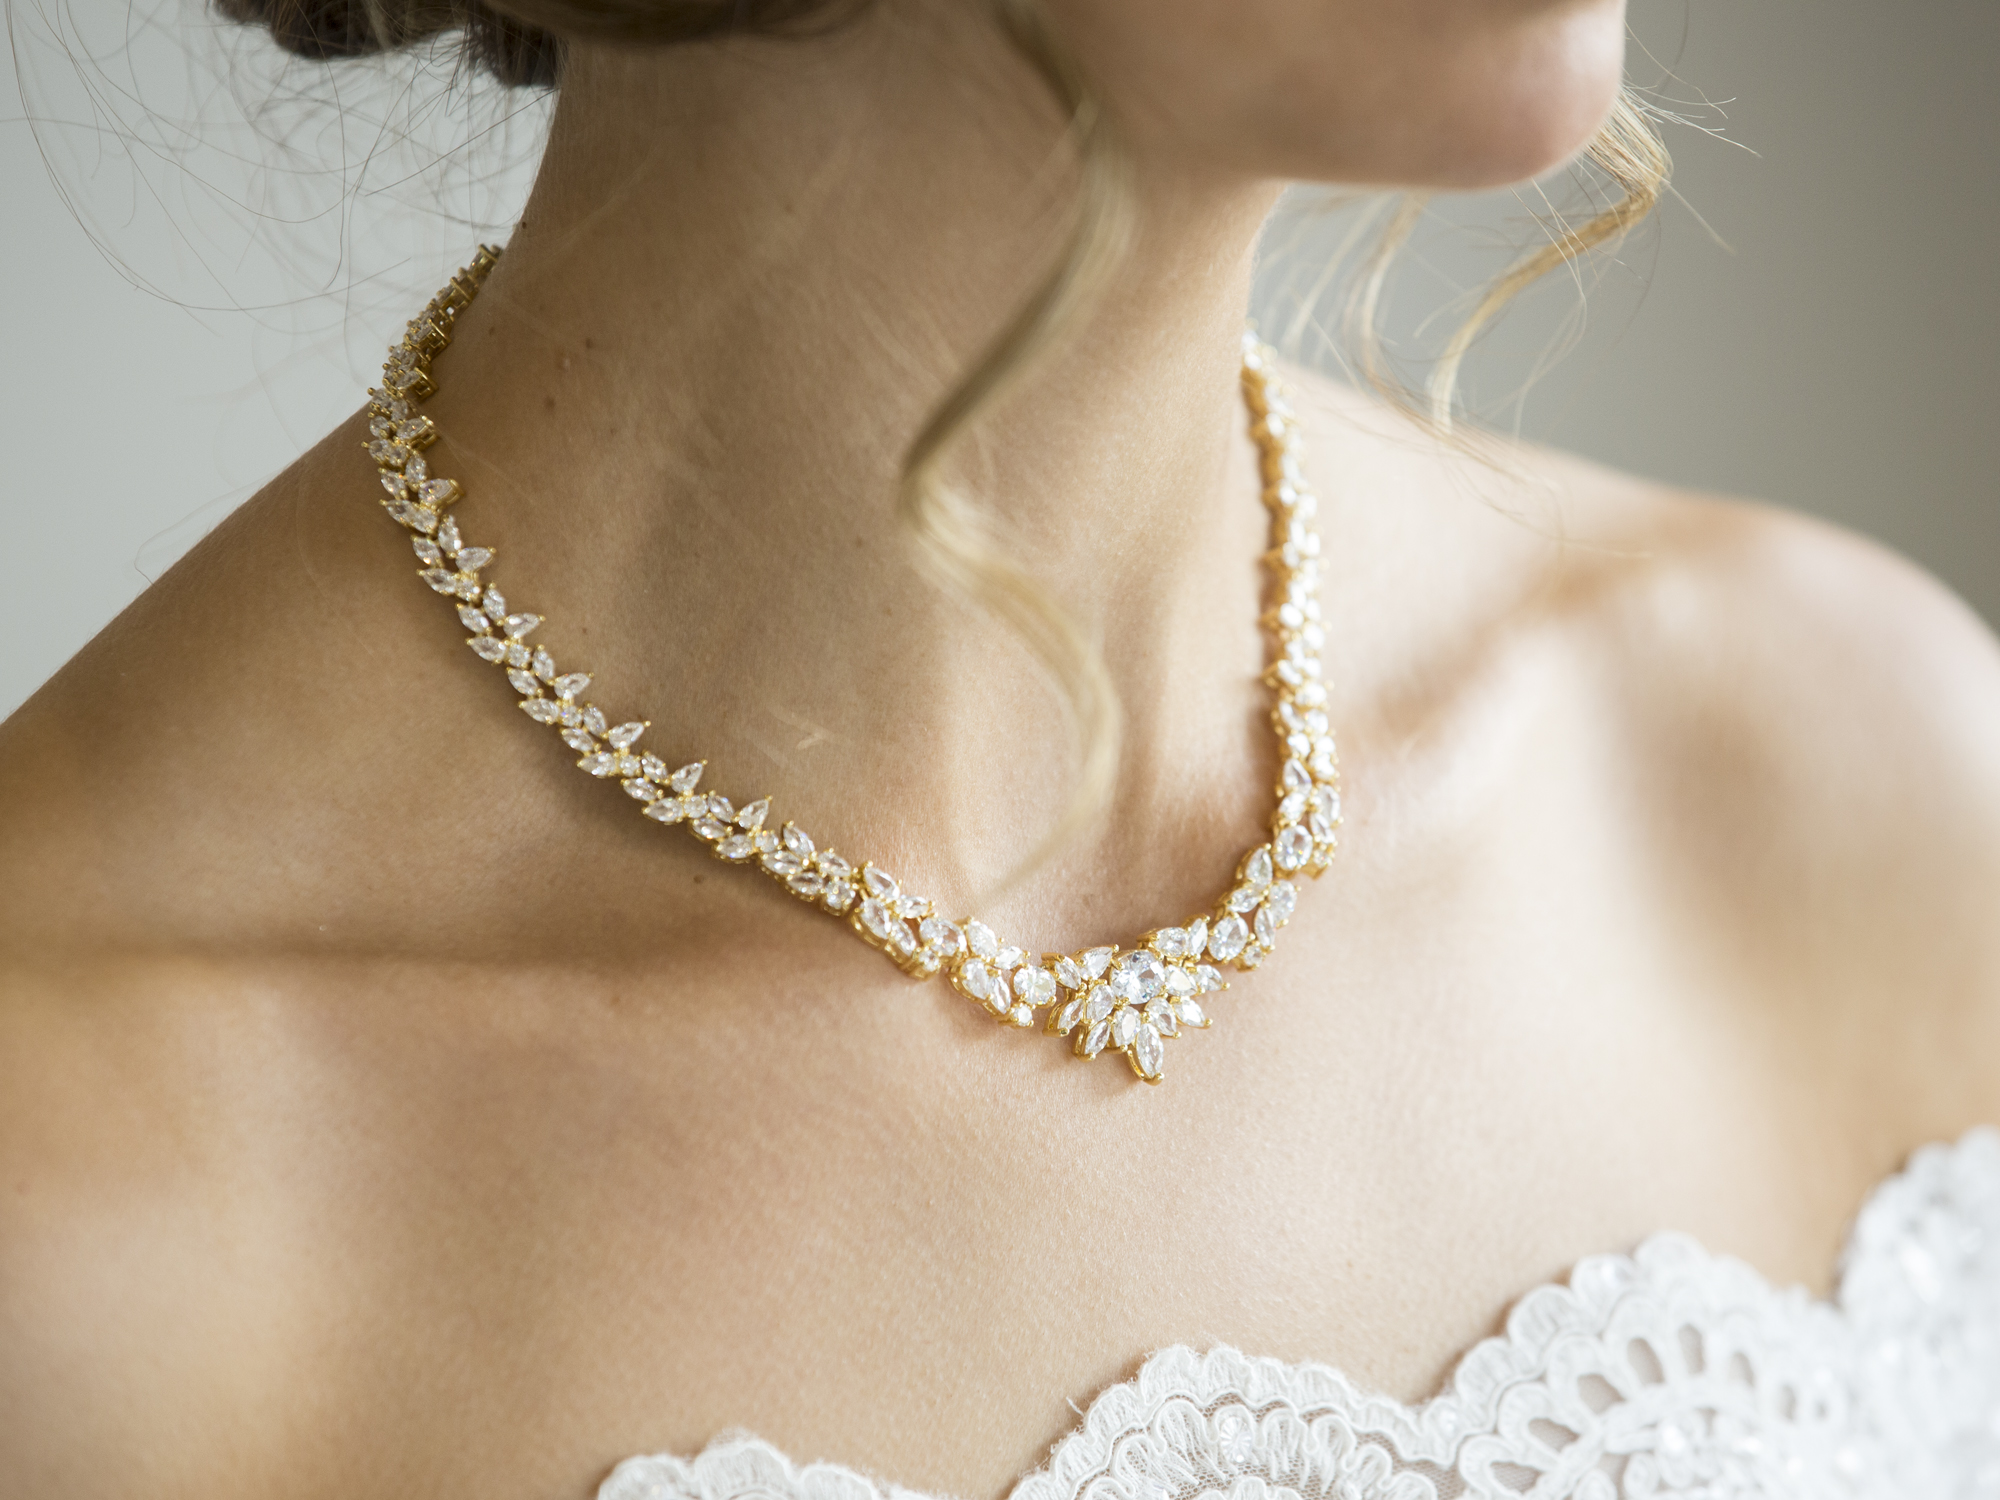 gold necklace for marriage| Aulora I Jeanette Maree|Shop online now